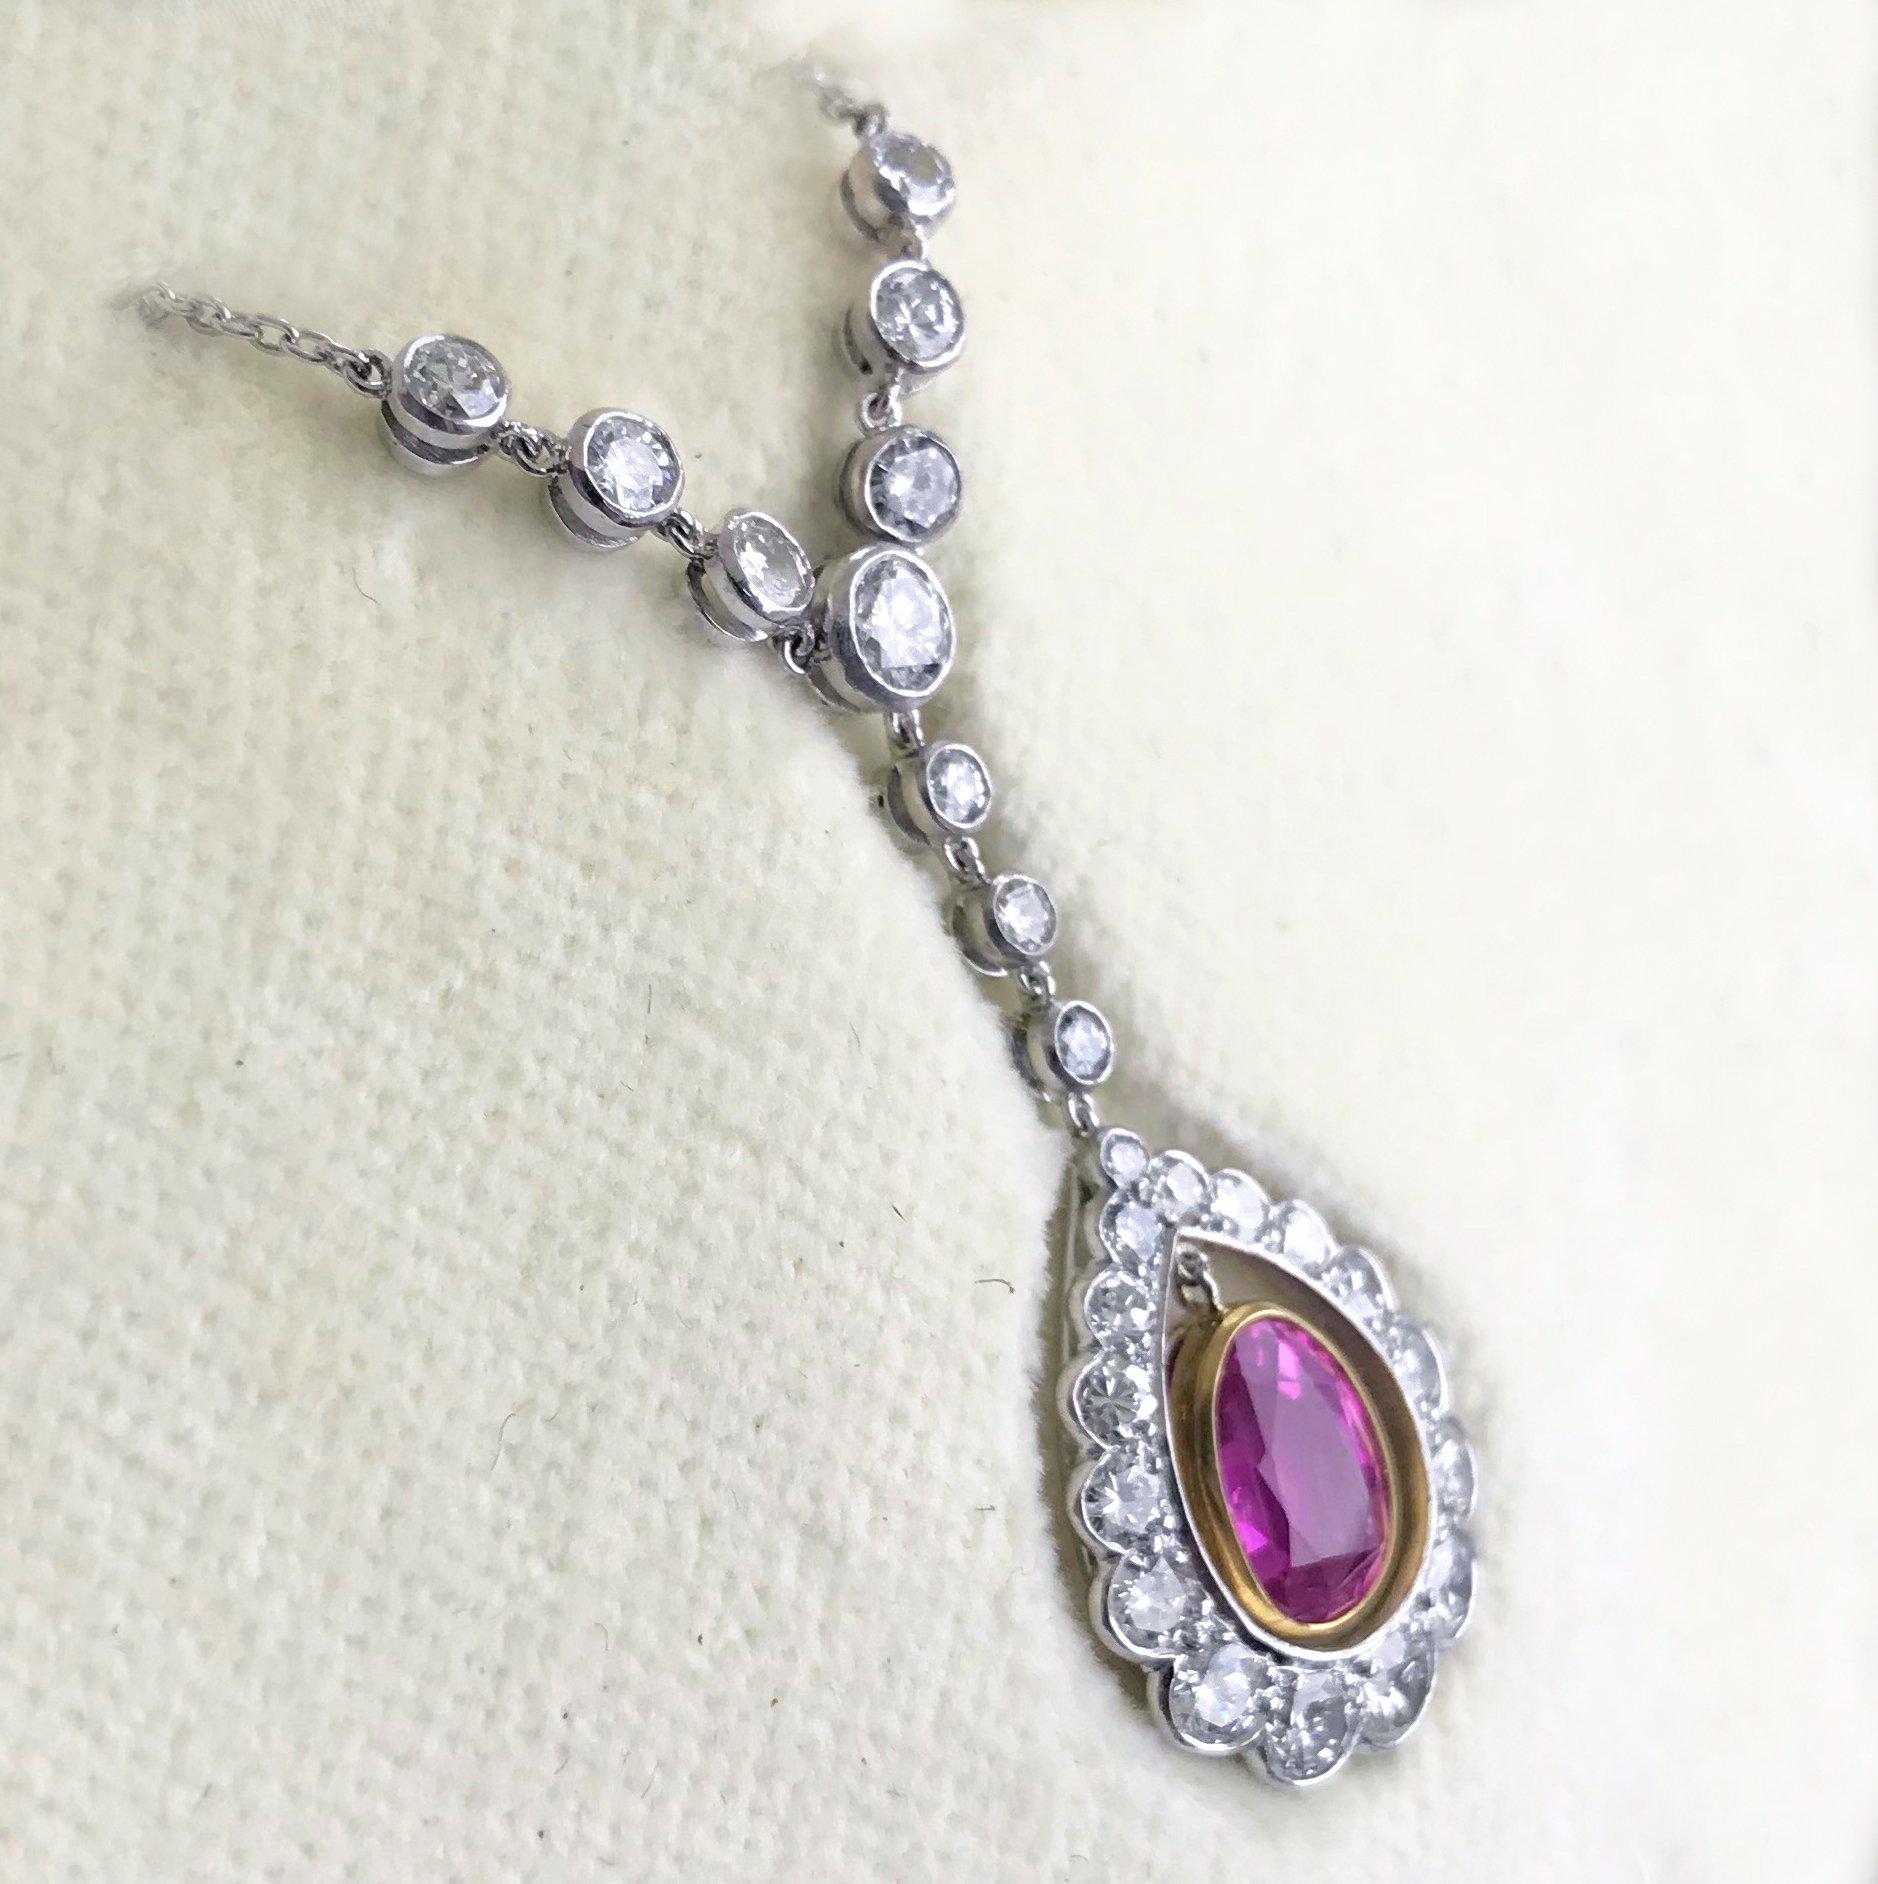 Art Deco, Natural Untreated, Burma, Pink Sapphire and Diamond pendant on a platinum chain, circa 1930.

Articulated, tremblant, central pear shape Pink Sapphire drop, 2.27 carats, (Certificated, natural, Burma and unheated) mounted in 18ct yellow